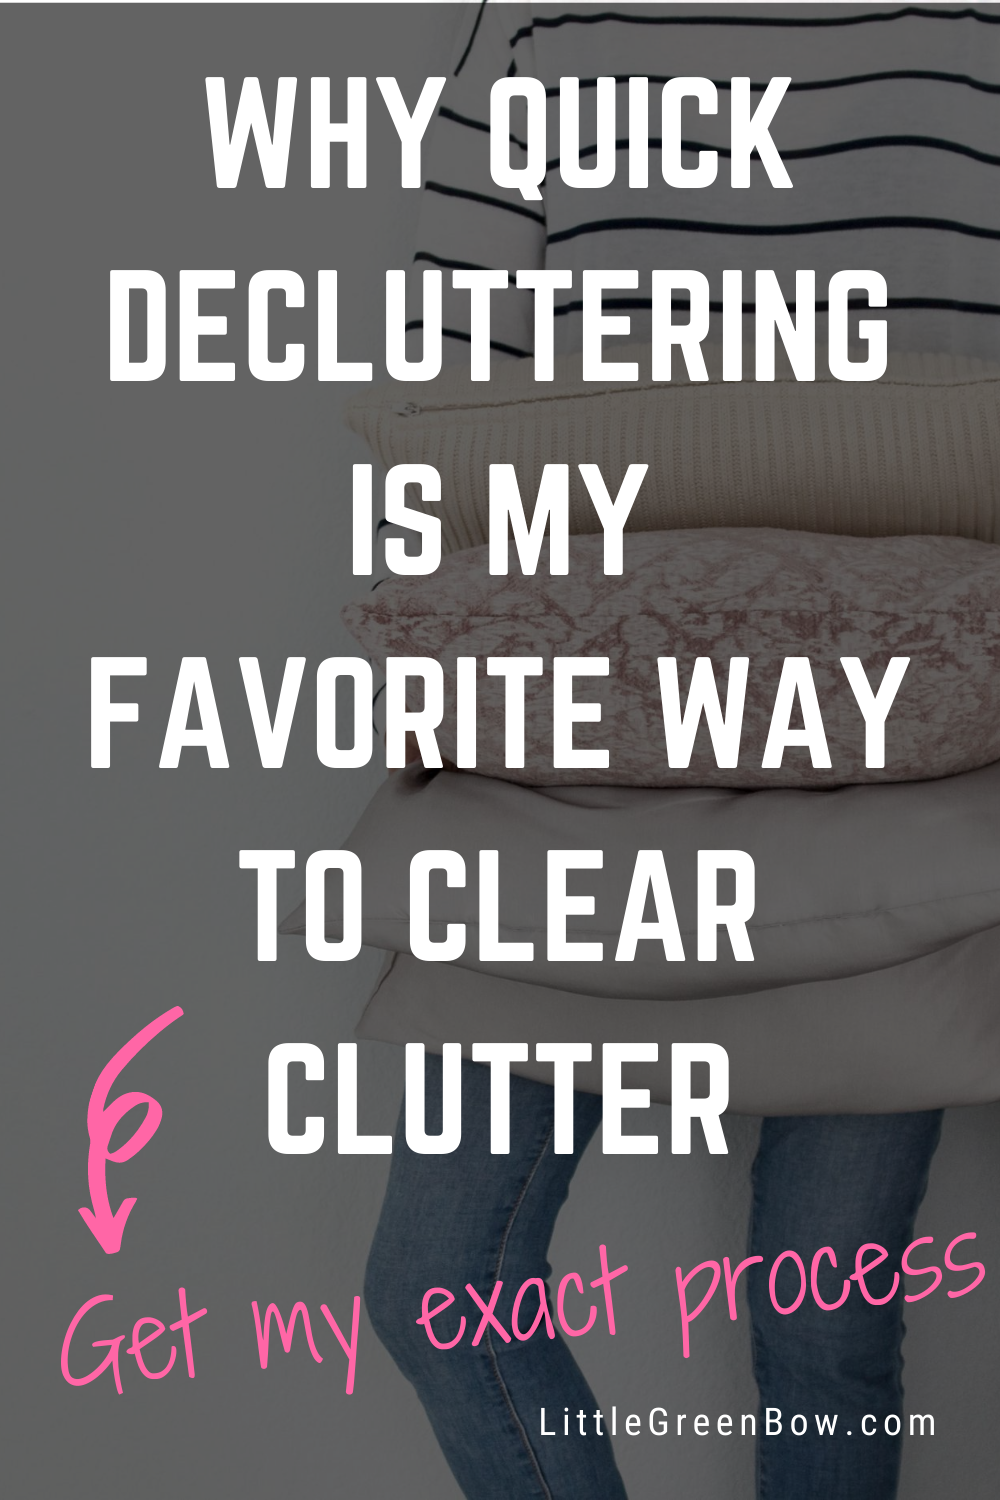 Why QUICK Decluttering is my favorite way to clear clutter